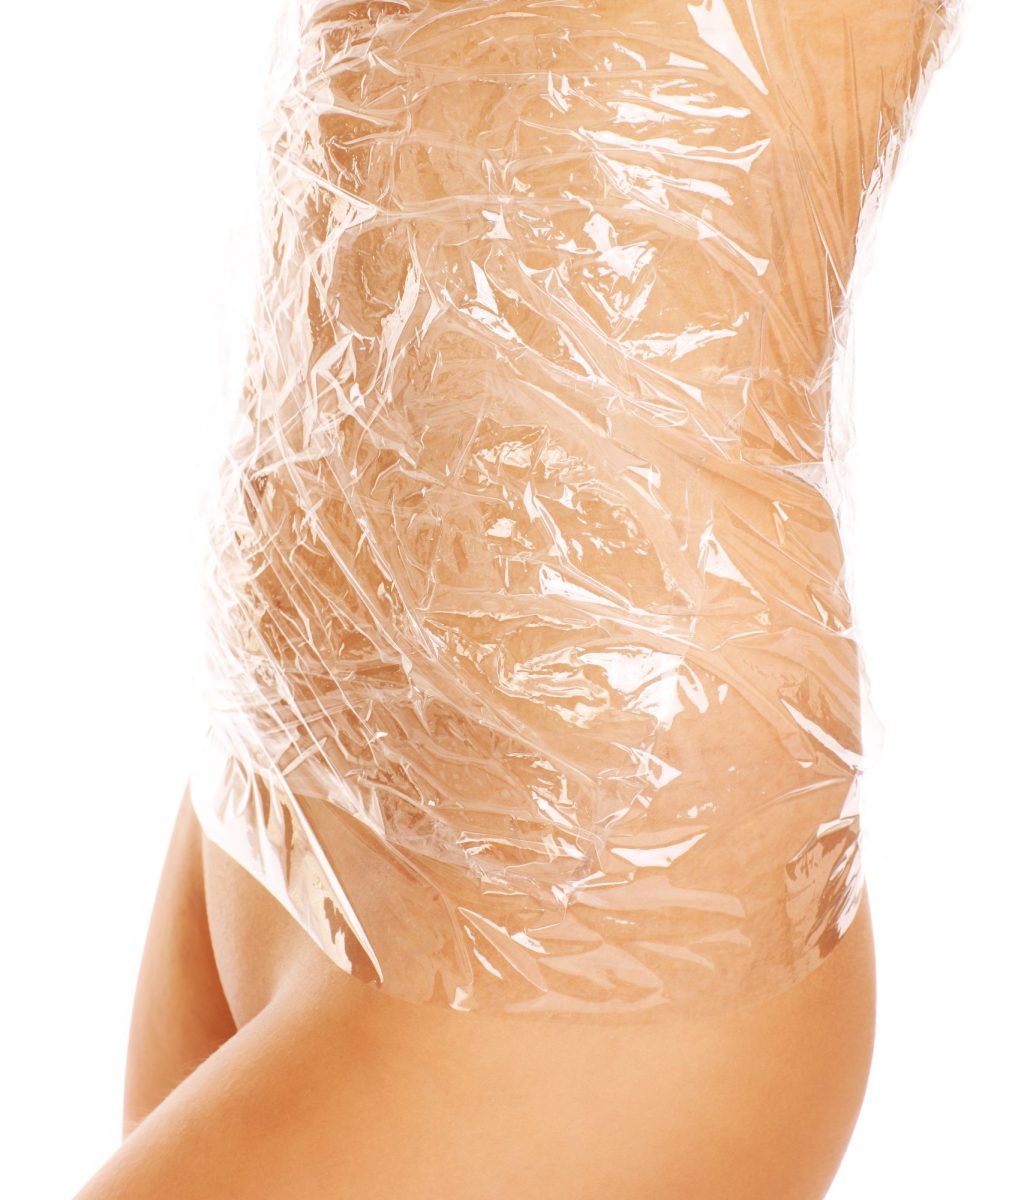 A picture of female belly wraped with foil over white background